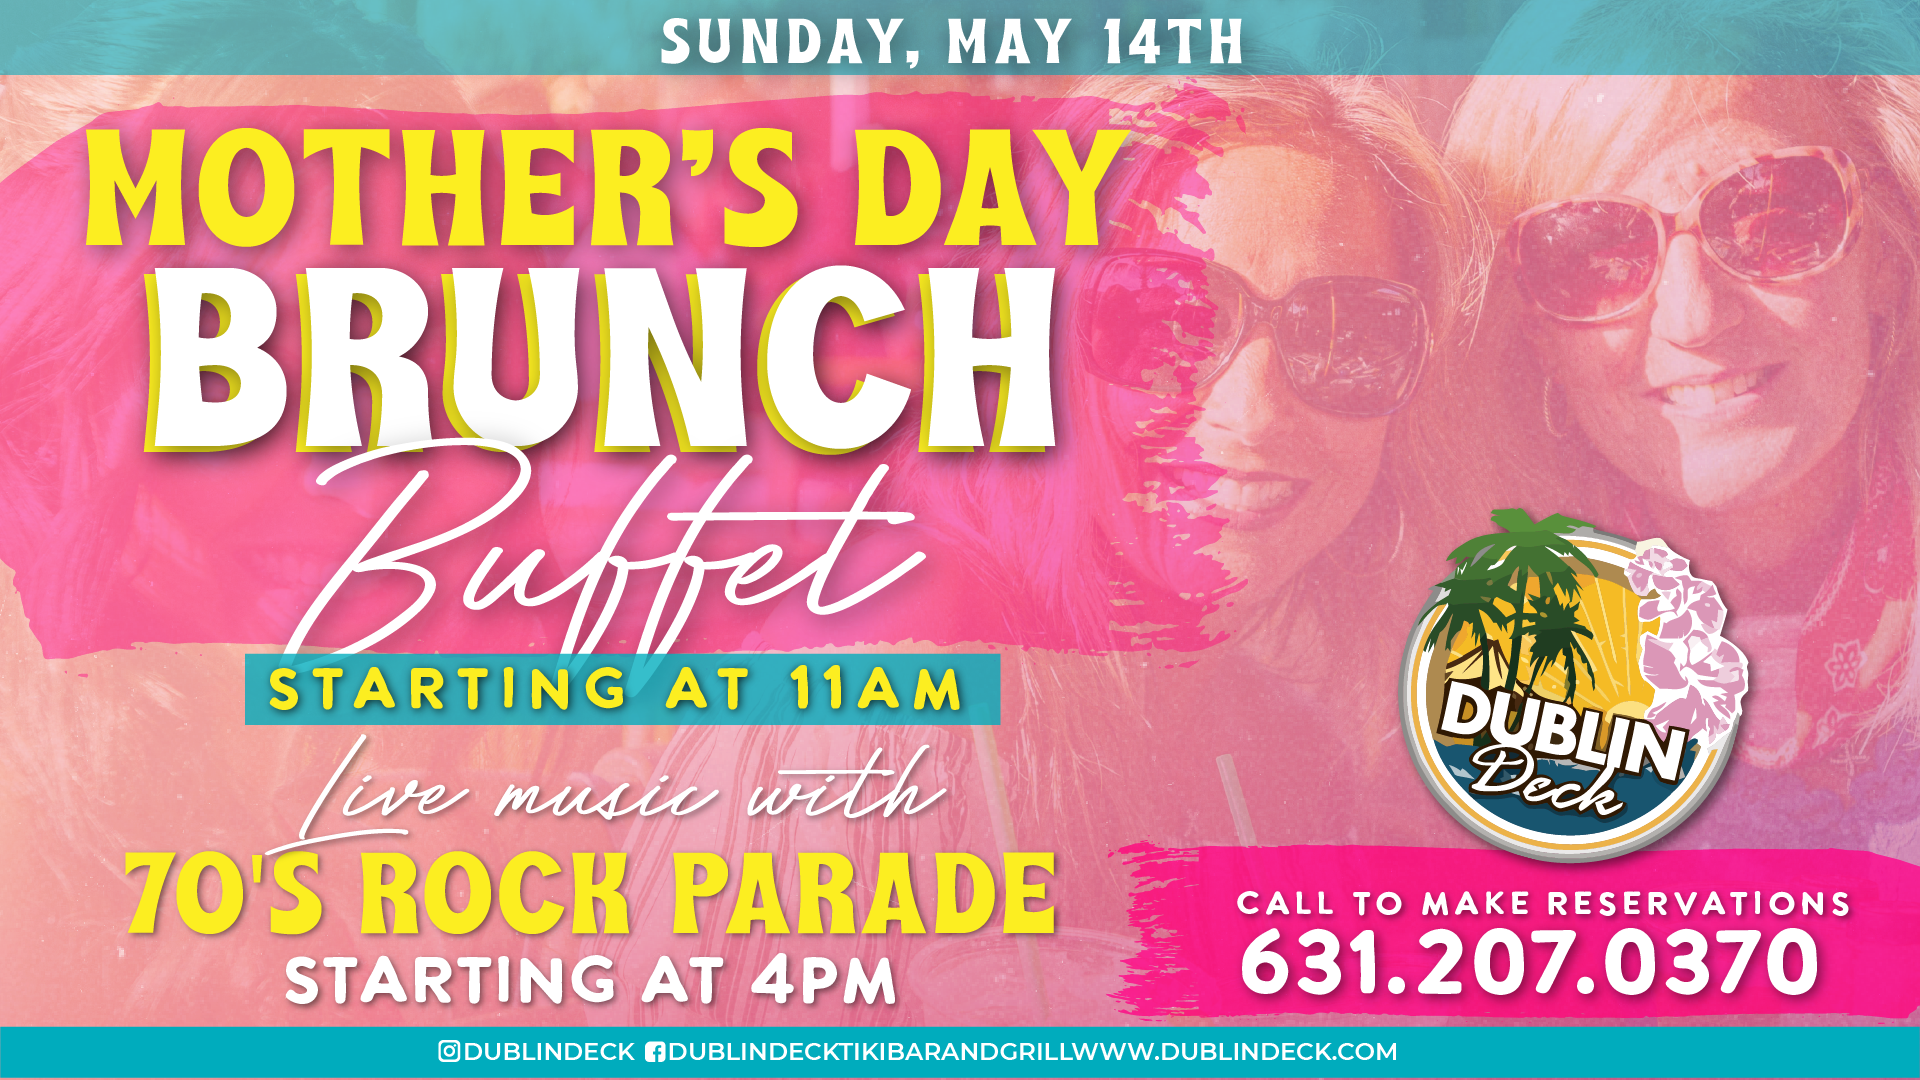 Treat Mom to the perfect Mother's Day at Dublin Deck! We'll be servin' our unlimited brunch buffet for $39.95 and $10 unlimited mimosas, champagne punch, and champagne. Music by 70's Rock Parade starts at 4PM!